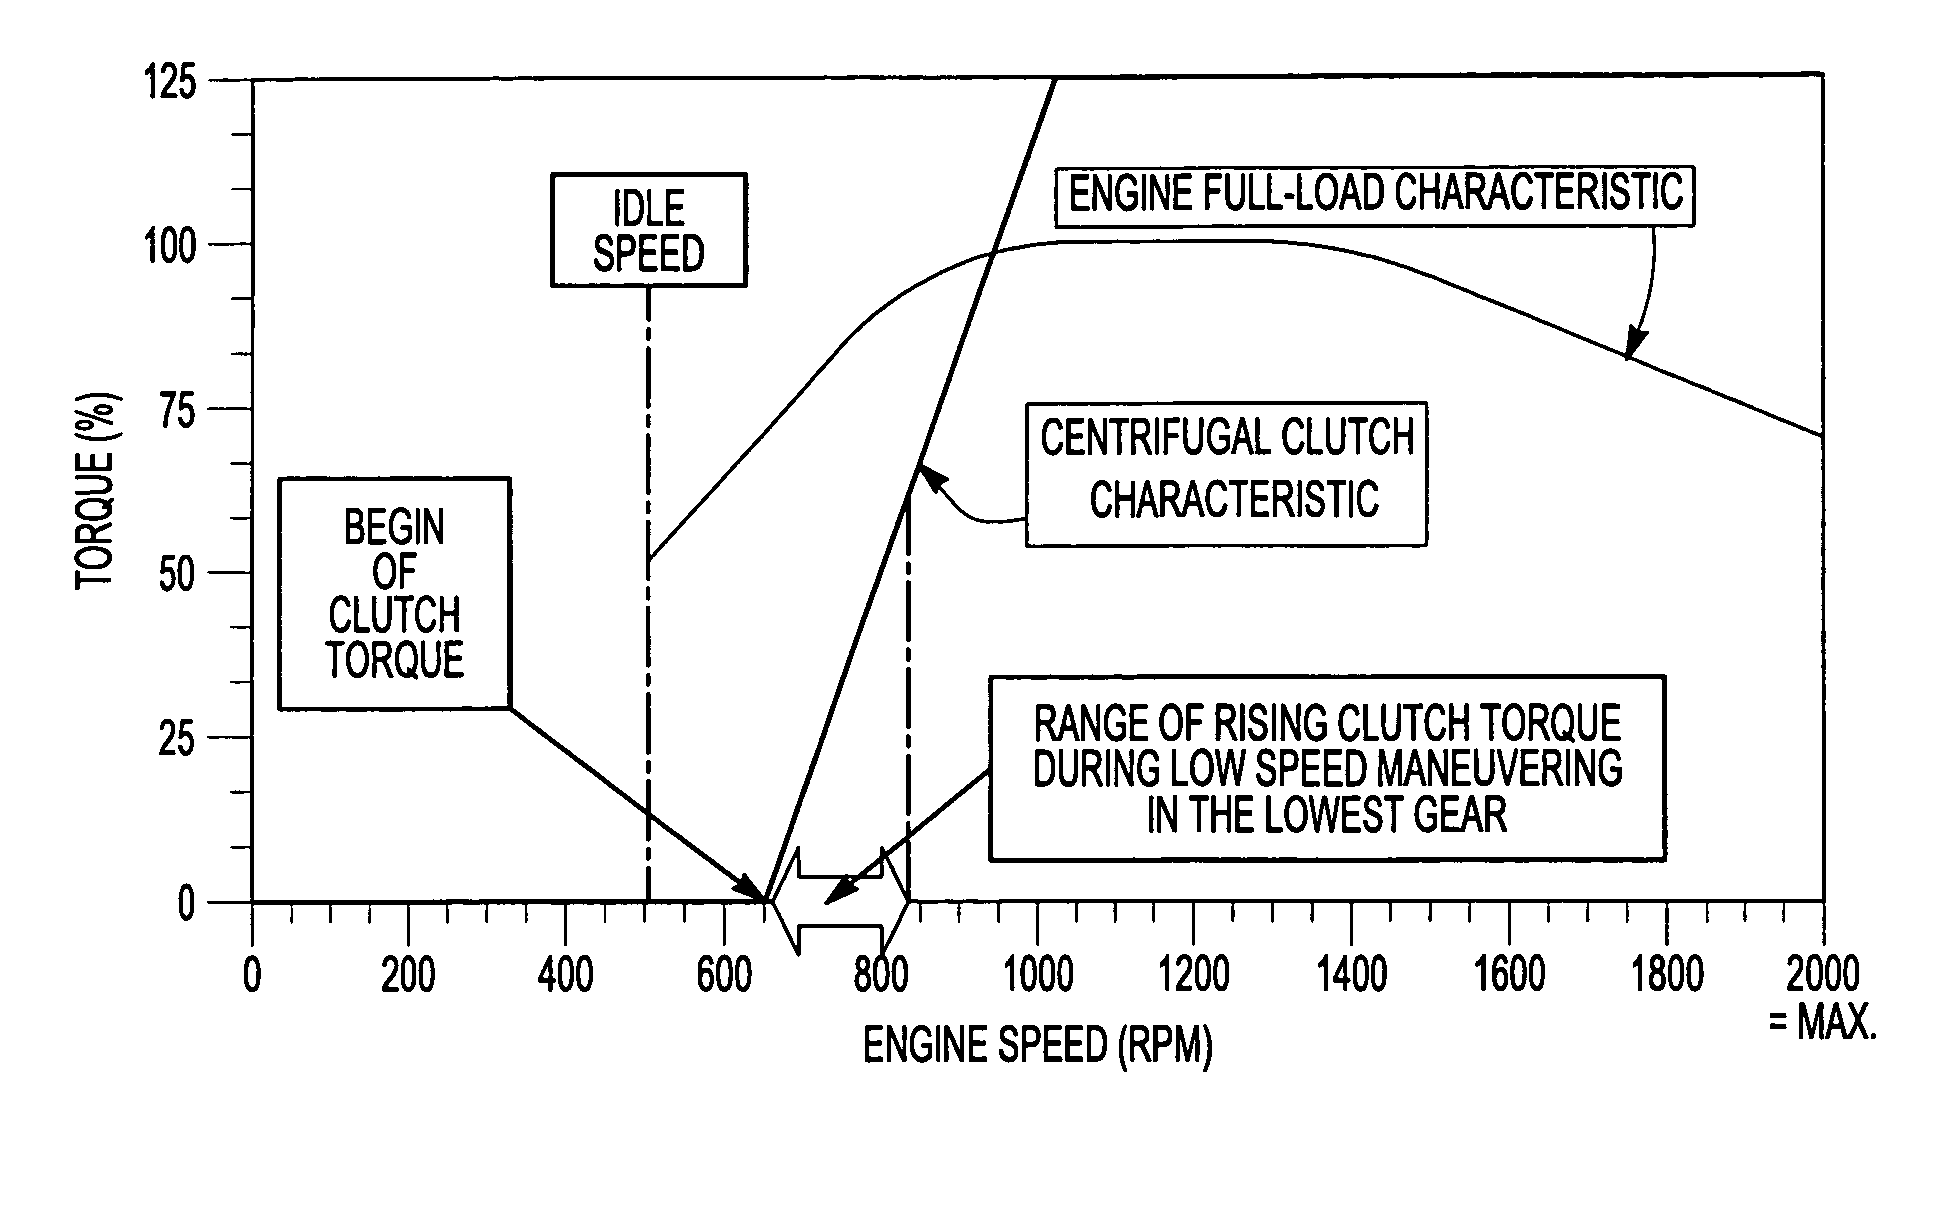 Centrifugal clutch assembly with dedicated maneuvering mode